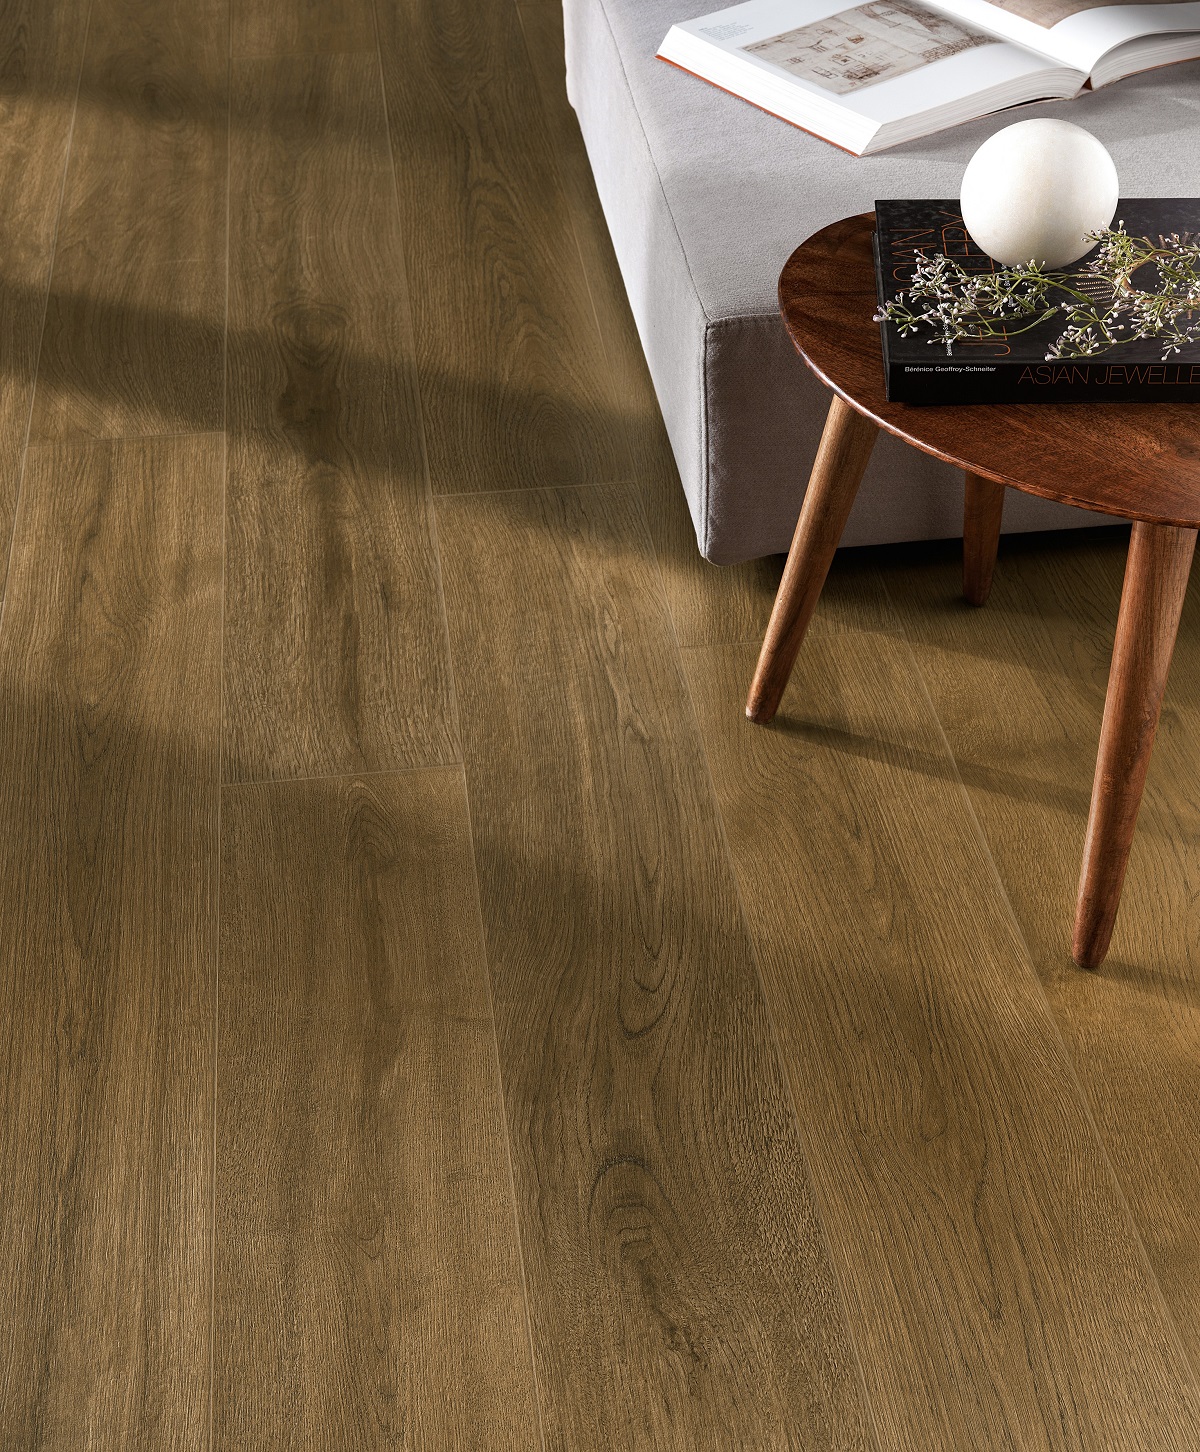 Entice porcelain tile collection by Atlas Concorde in Browned Oak